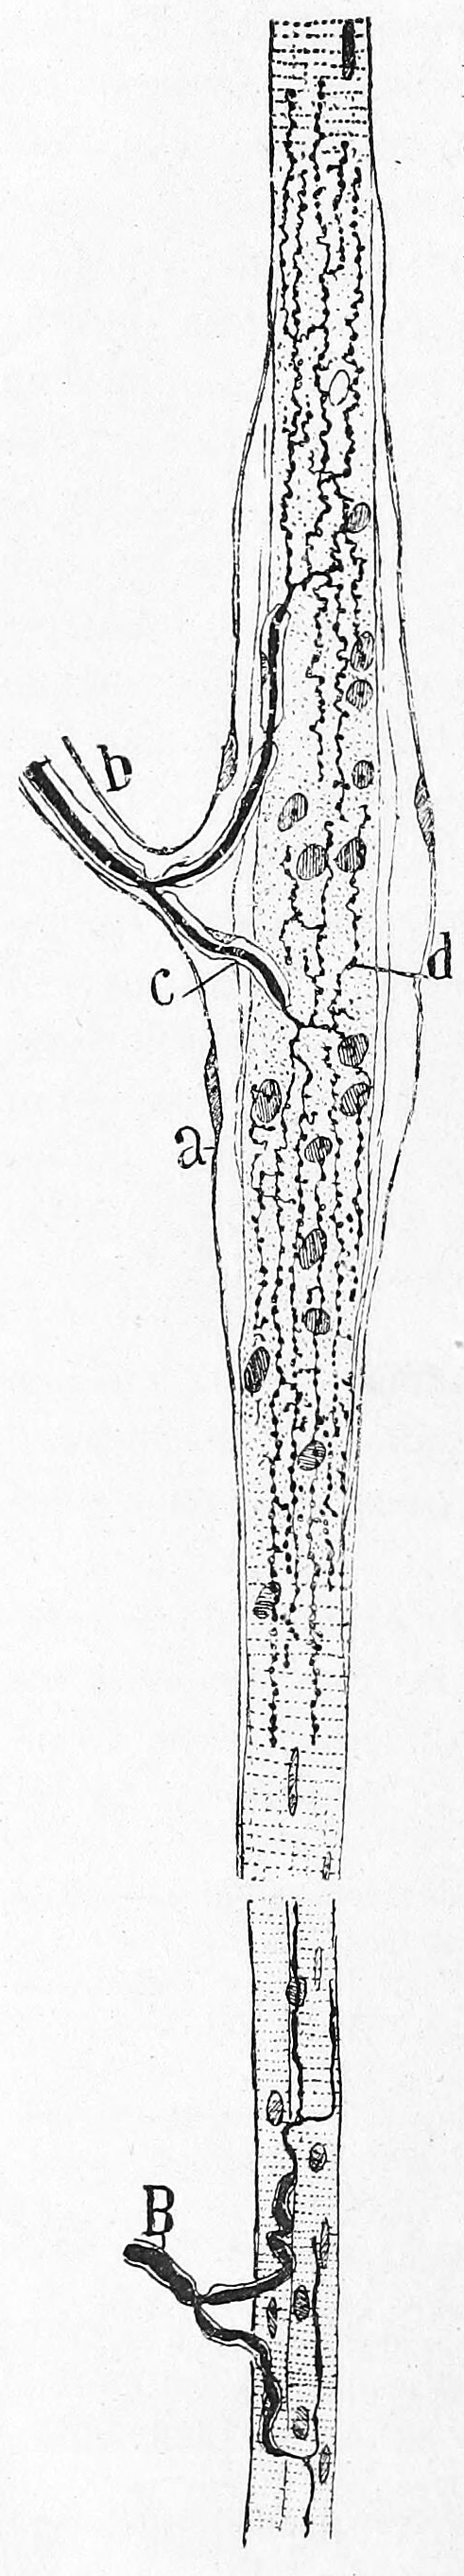 Muscle spindle from the pectoral muscle of a frog. Bottom part of figure: B) extrafusal muscle fibers with efferent motor nerve; top part of figure: myelinated afferent nerve fiber. Histologie du système nerveux de l’homme & des vertébrés, Tome Premier (1909) by Santiago Ramón y Cajal translated from Spanish by Dr. L. Azoulay.